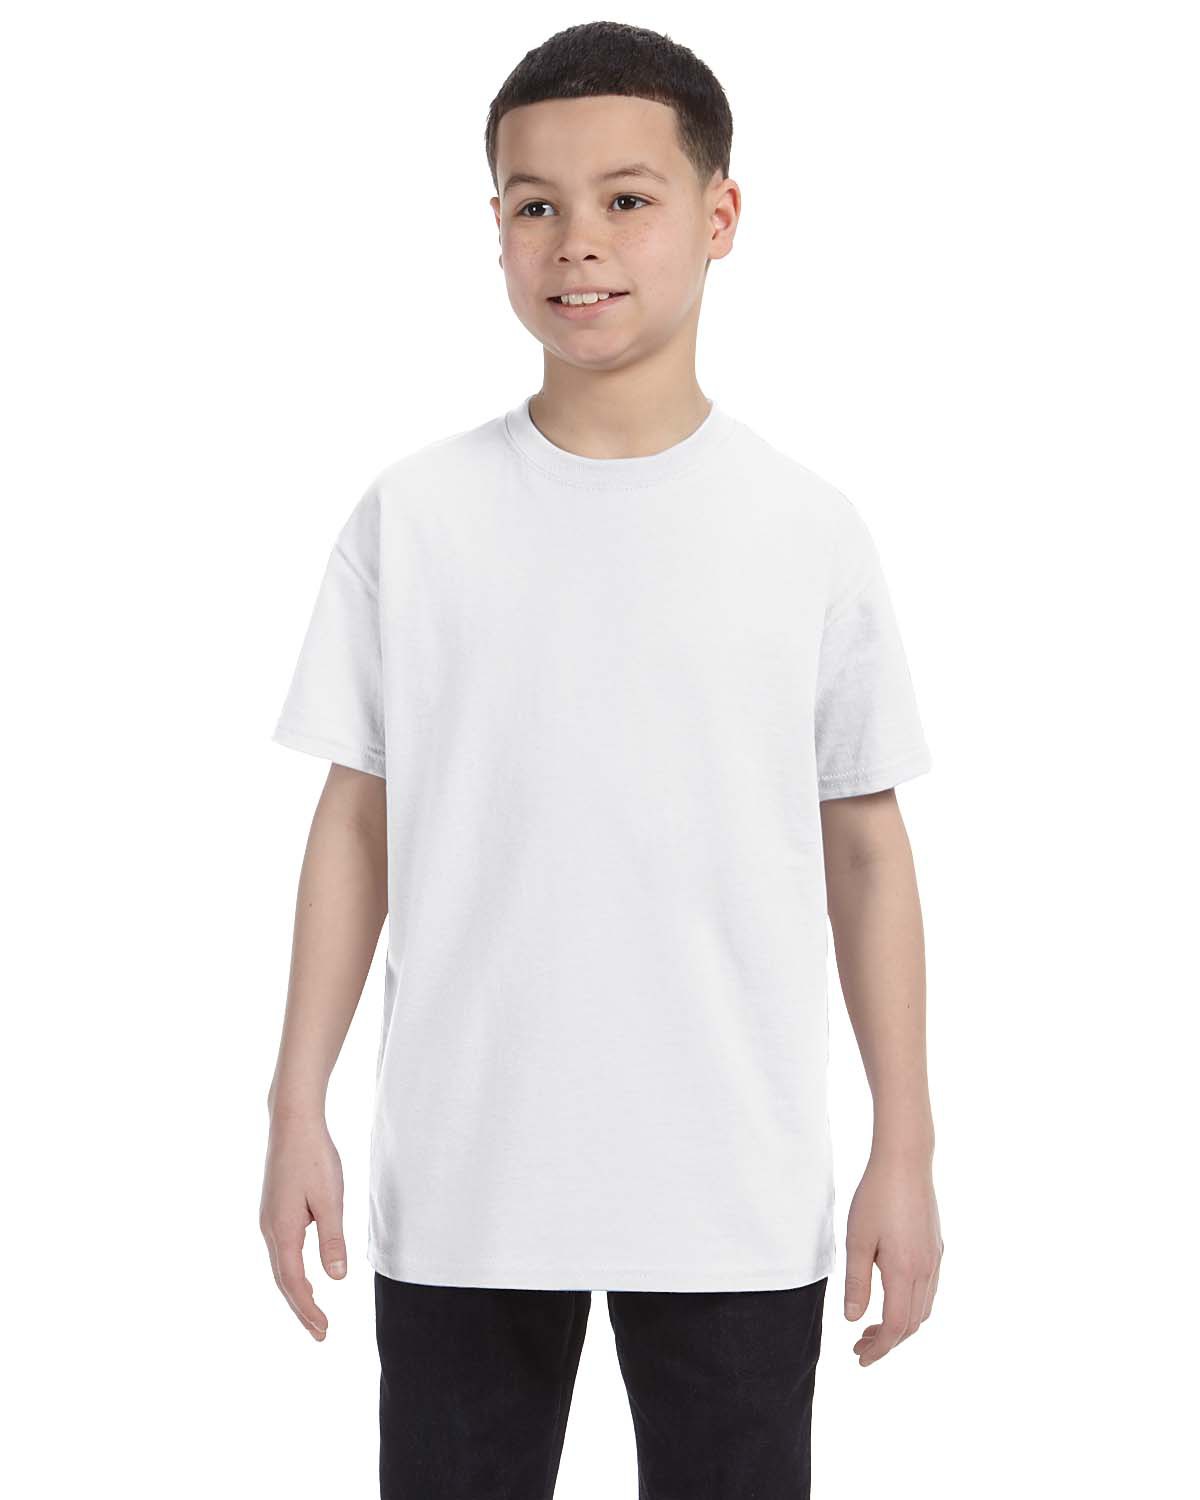 JERZEES Youth 50/50 Cotton/Poly Short-Sleeve T-Shirt 29B 